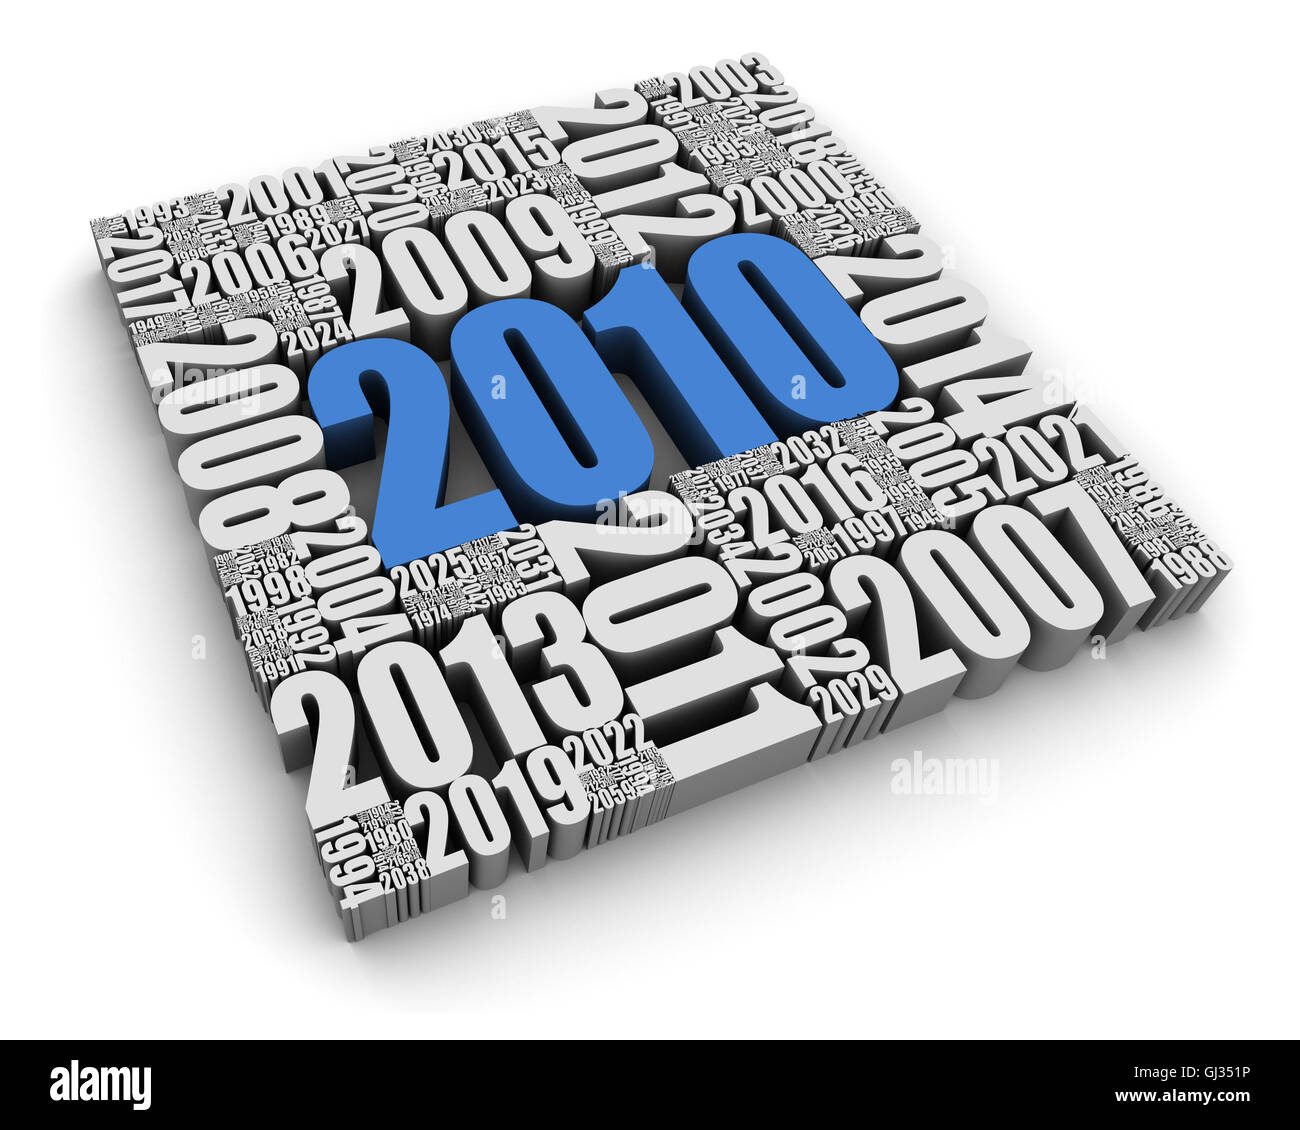 The Year 2010 Stock Photo